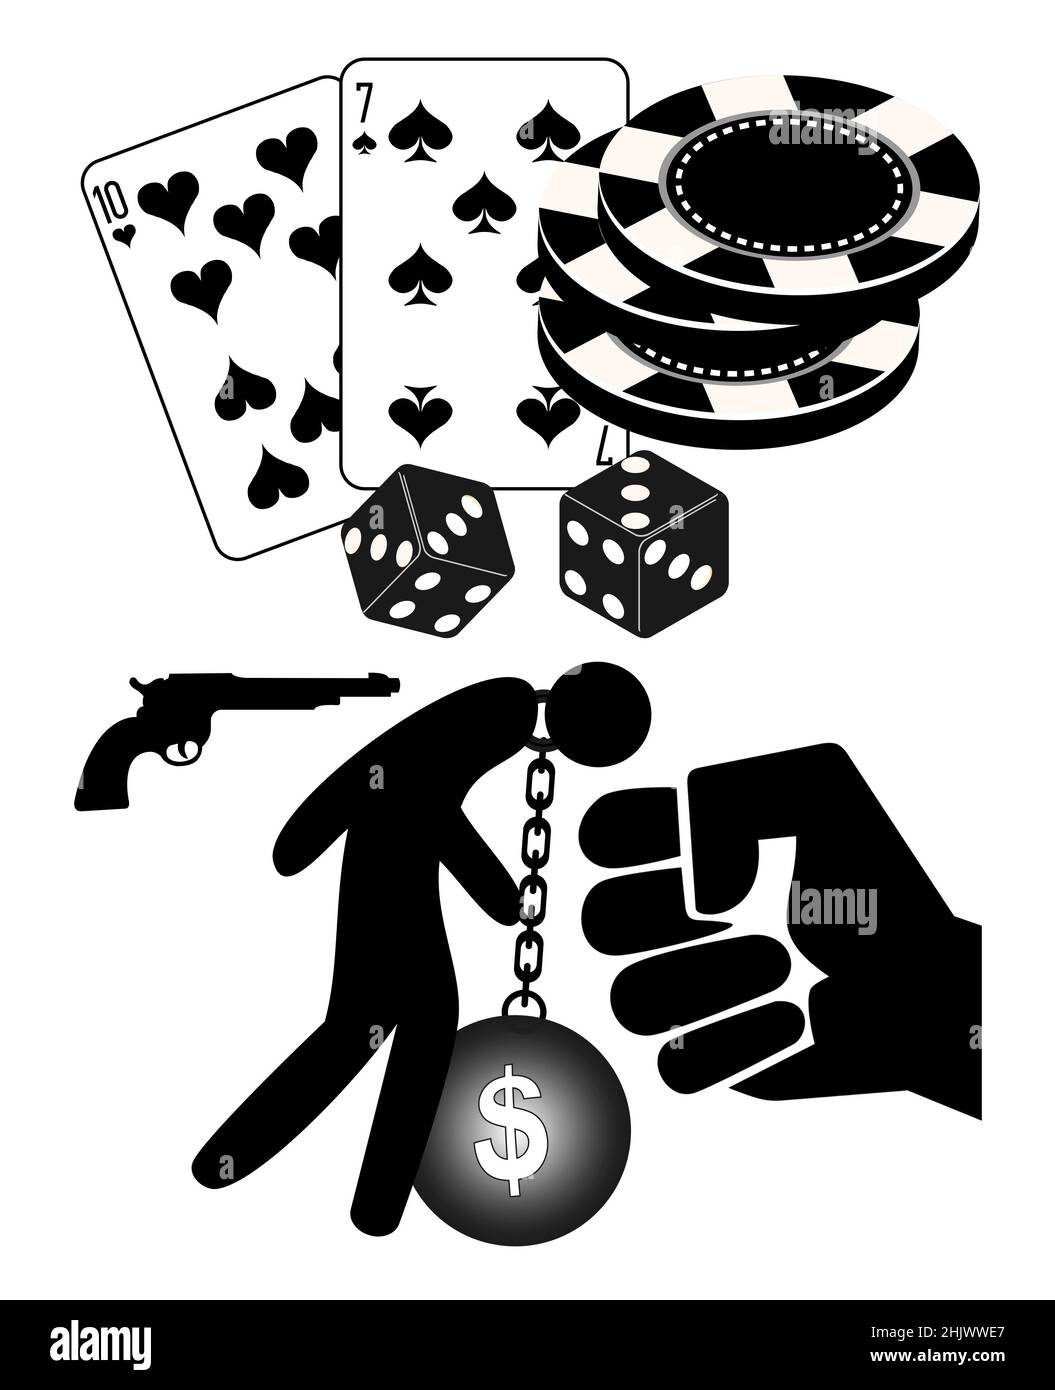 Debt-collectors with deadly force against person who cannot clear his gambling debts Stock Photo